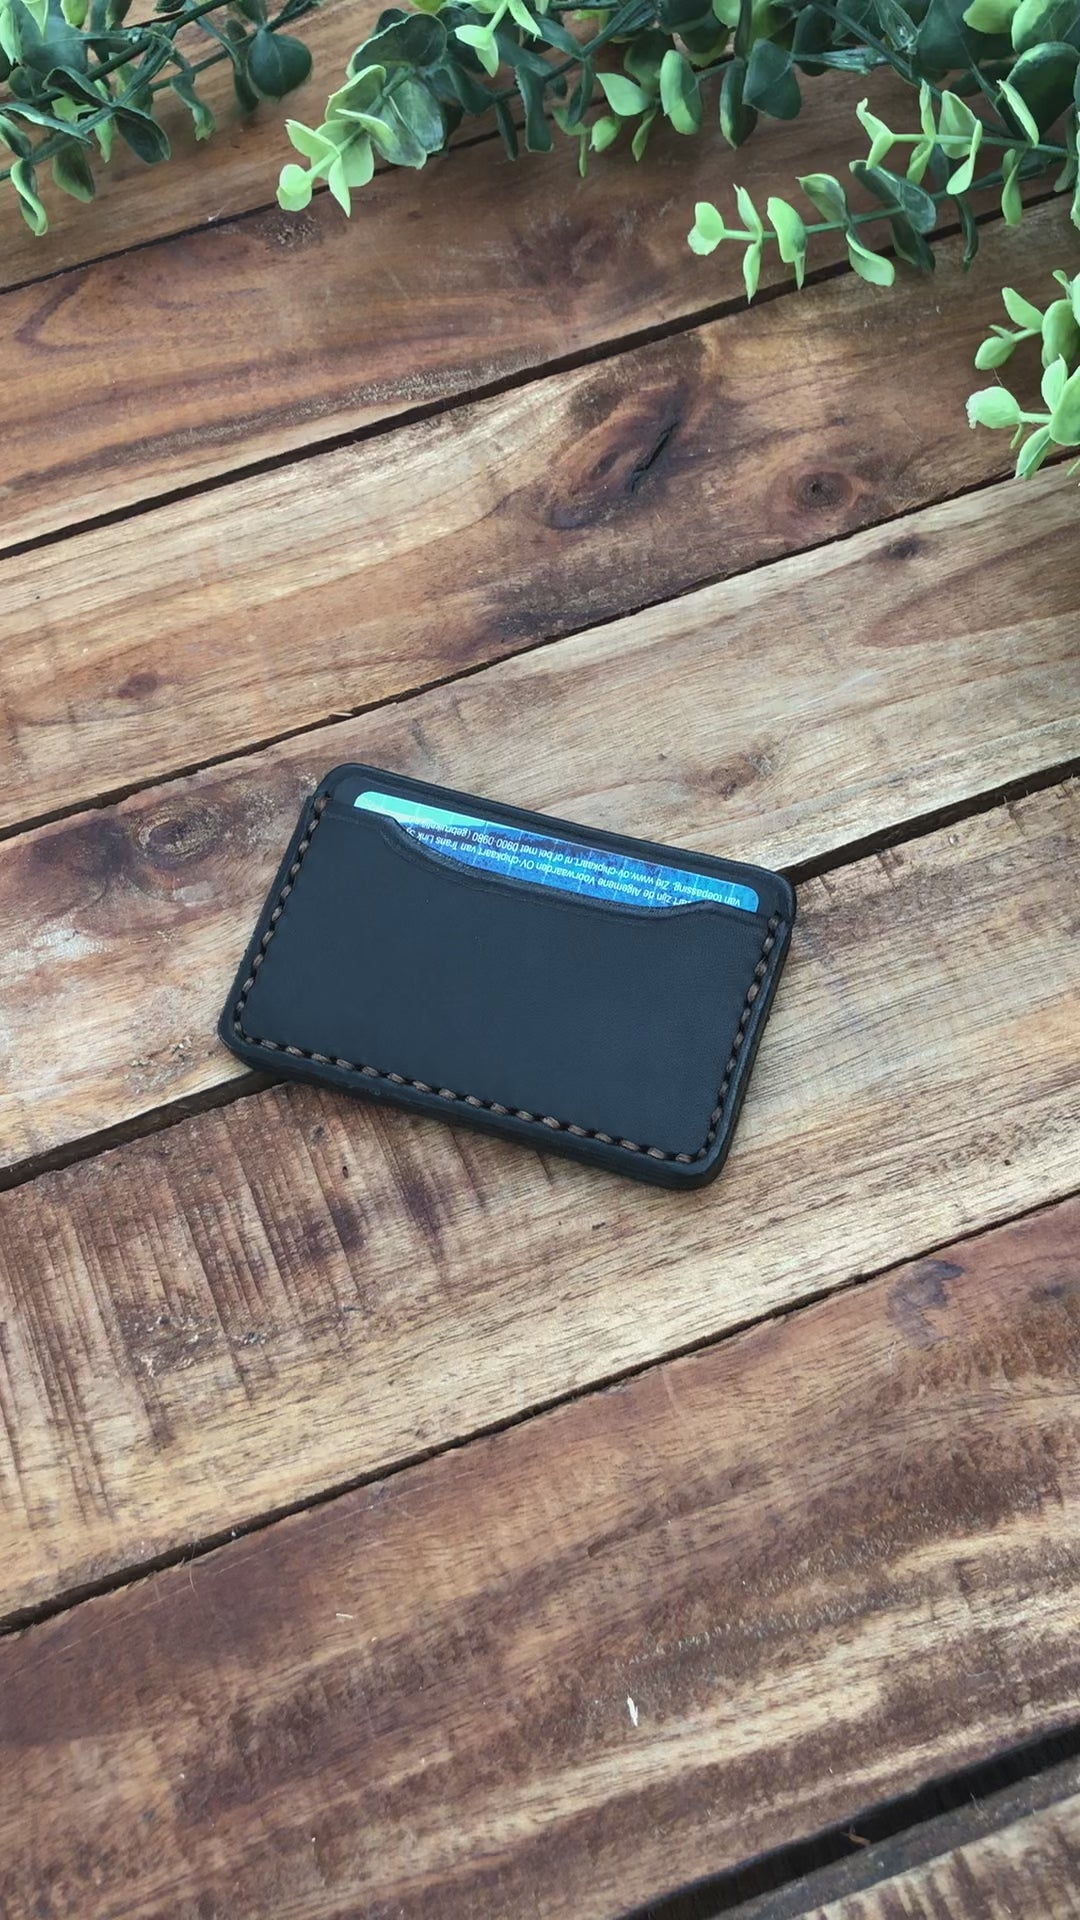 Video showing a Handmade Minimalist Black Leather Card Wallet